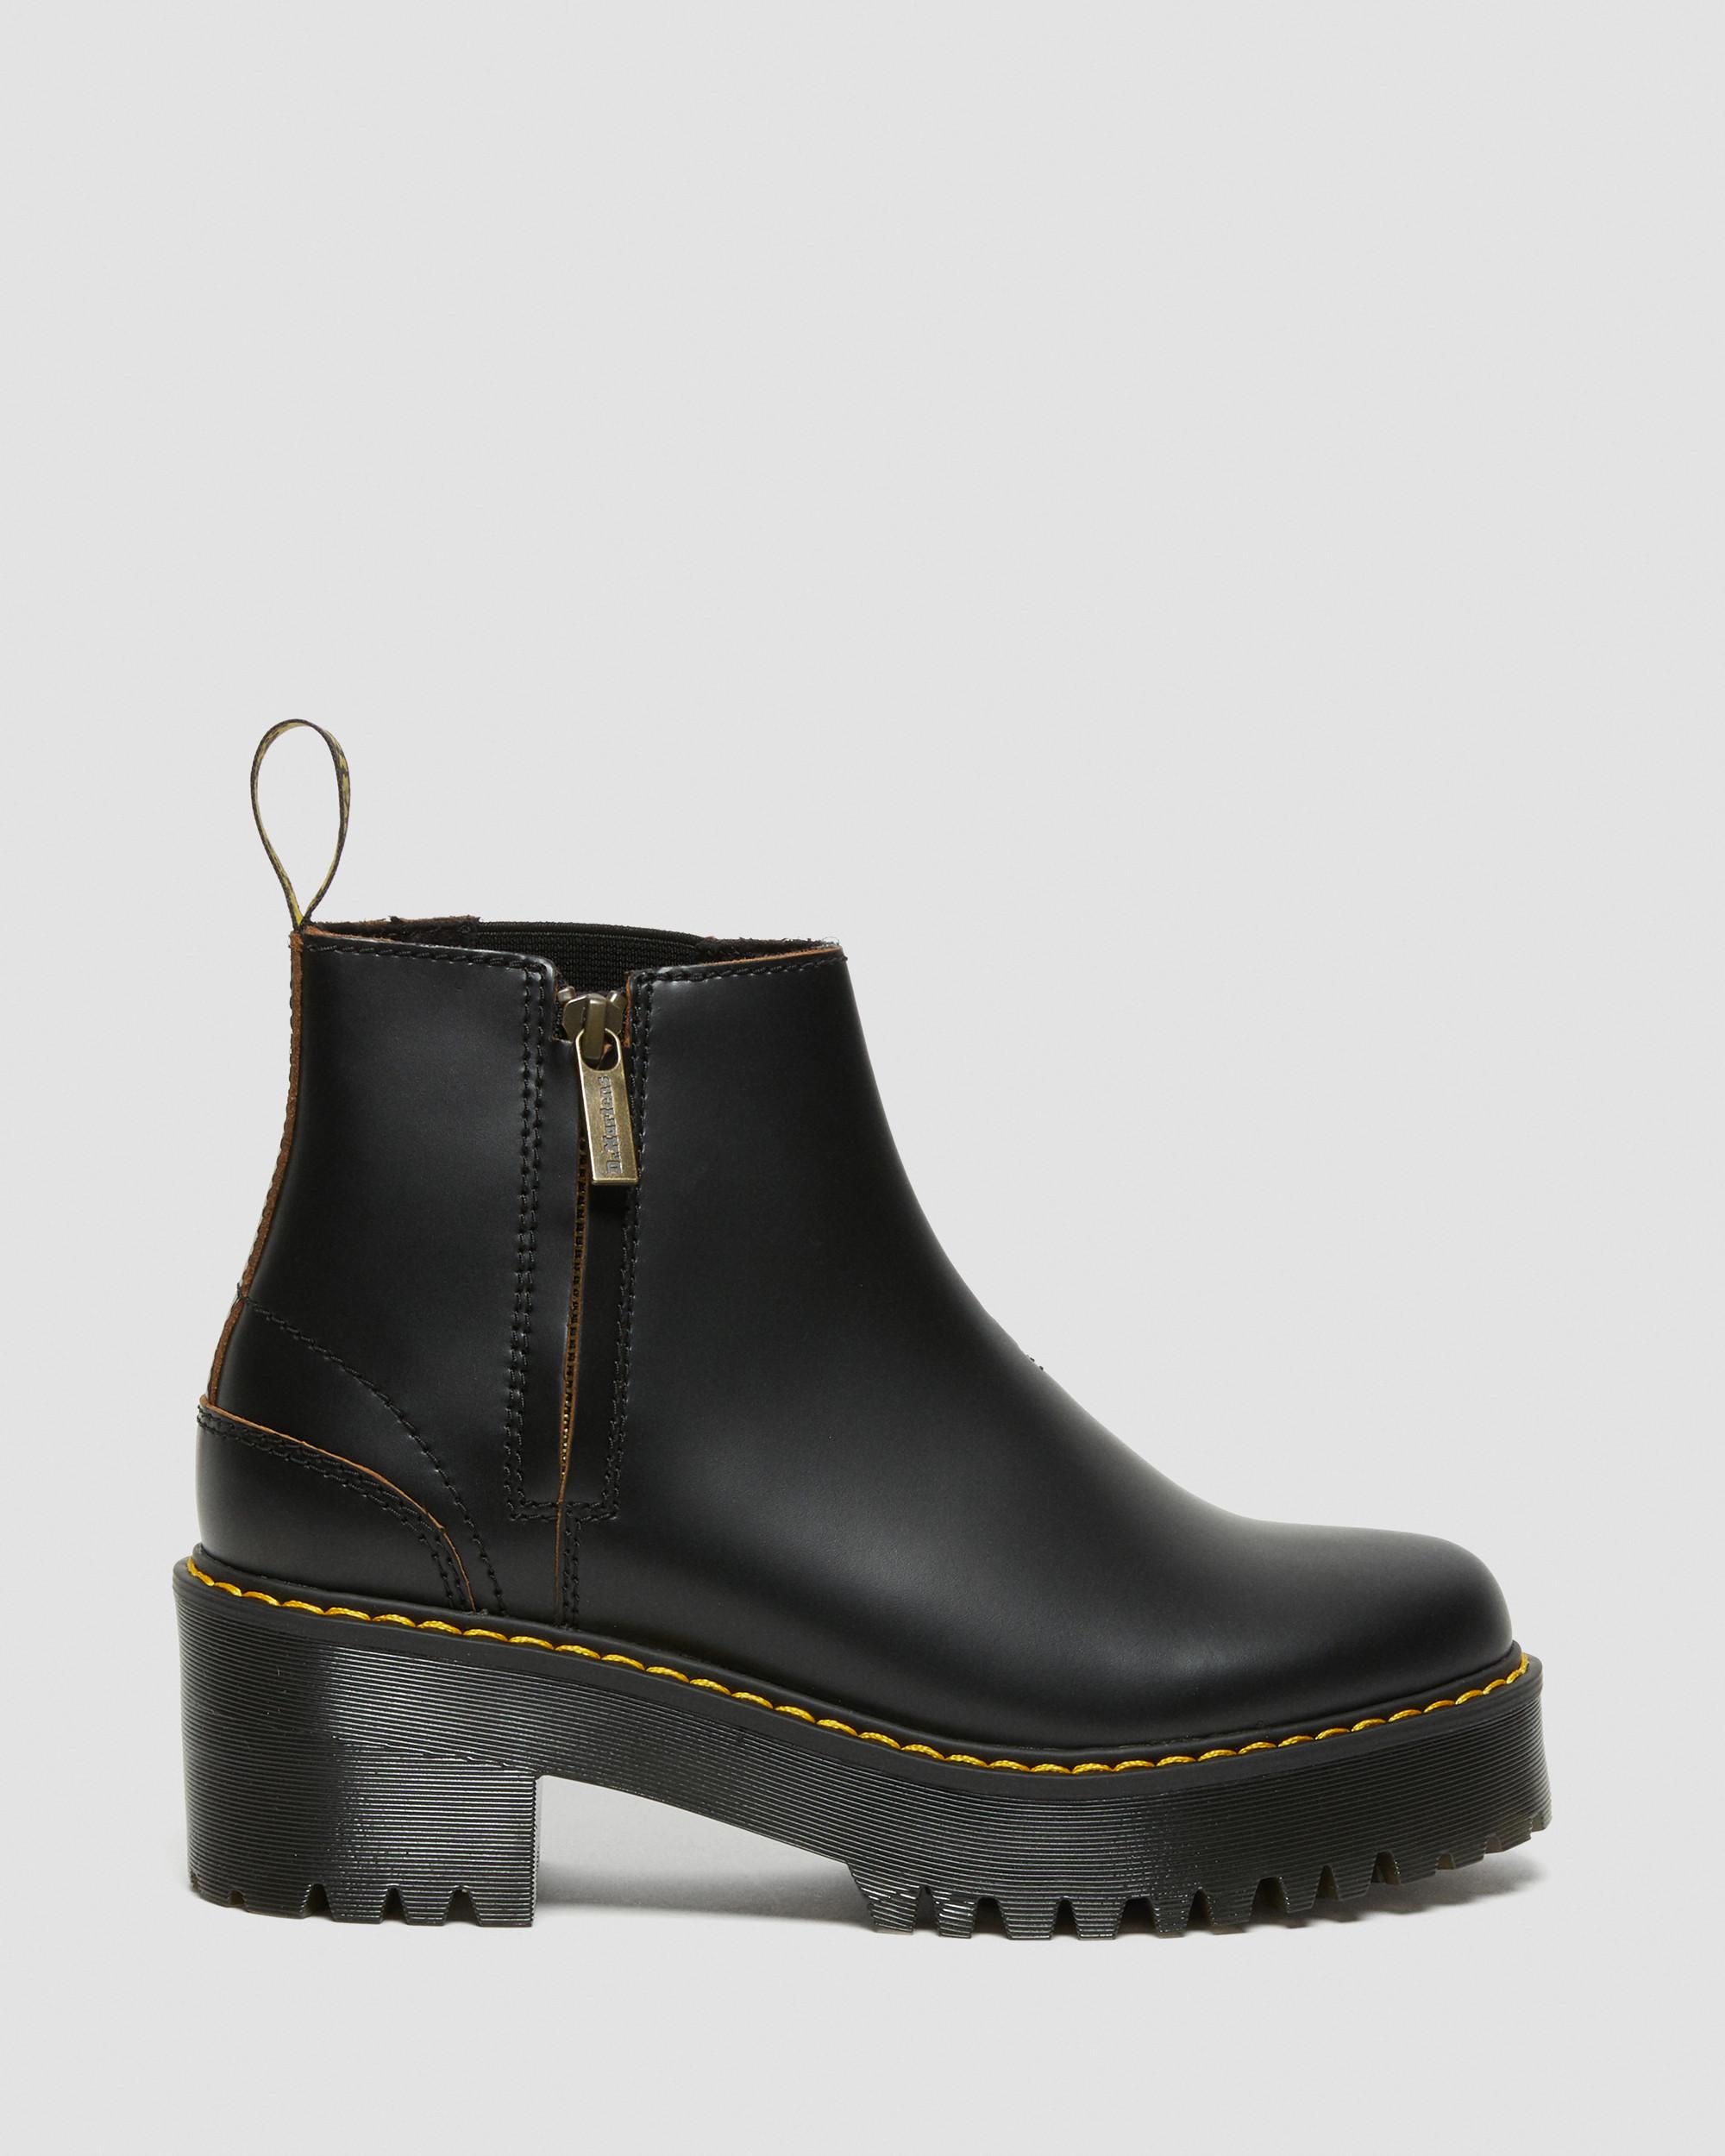 https://i1.adis.ws/i/drmartens/26200001.87.jpg?$large$ROMETTY II VINTAGE SMOOTH LEATHER ANKLE BOOTS Dr. Martens